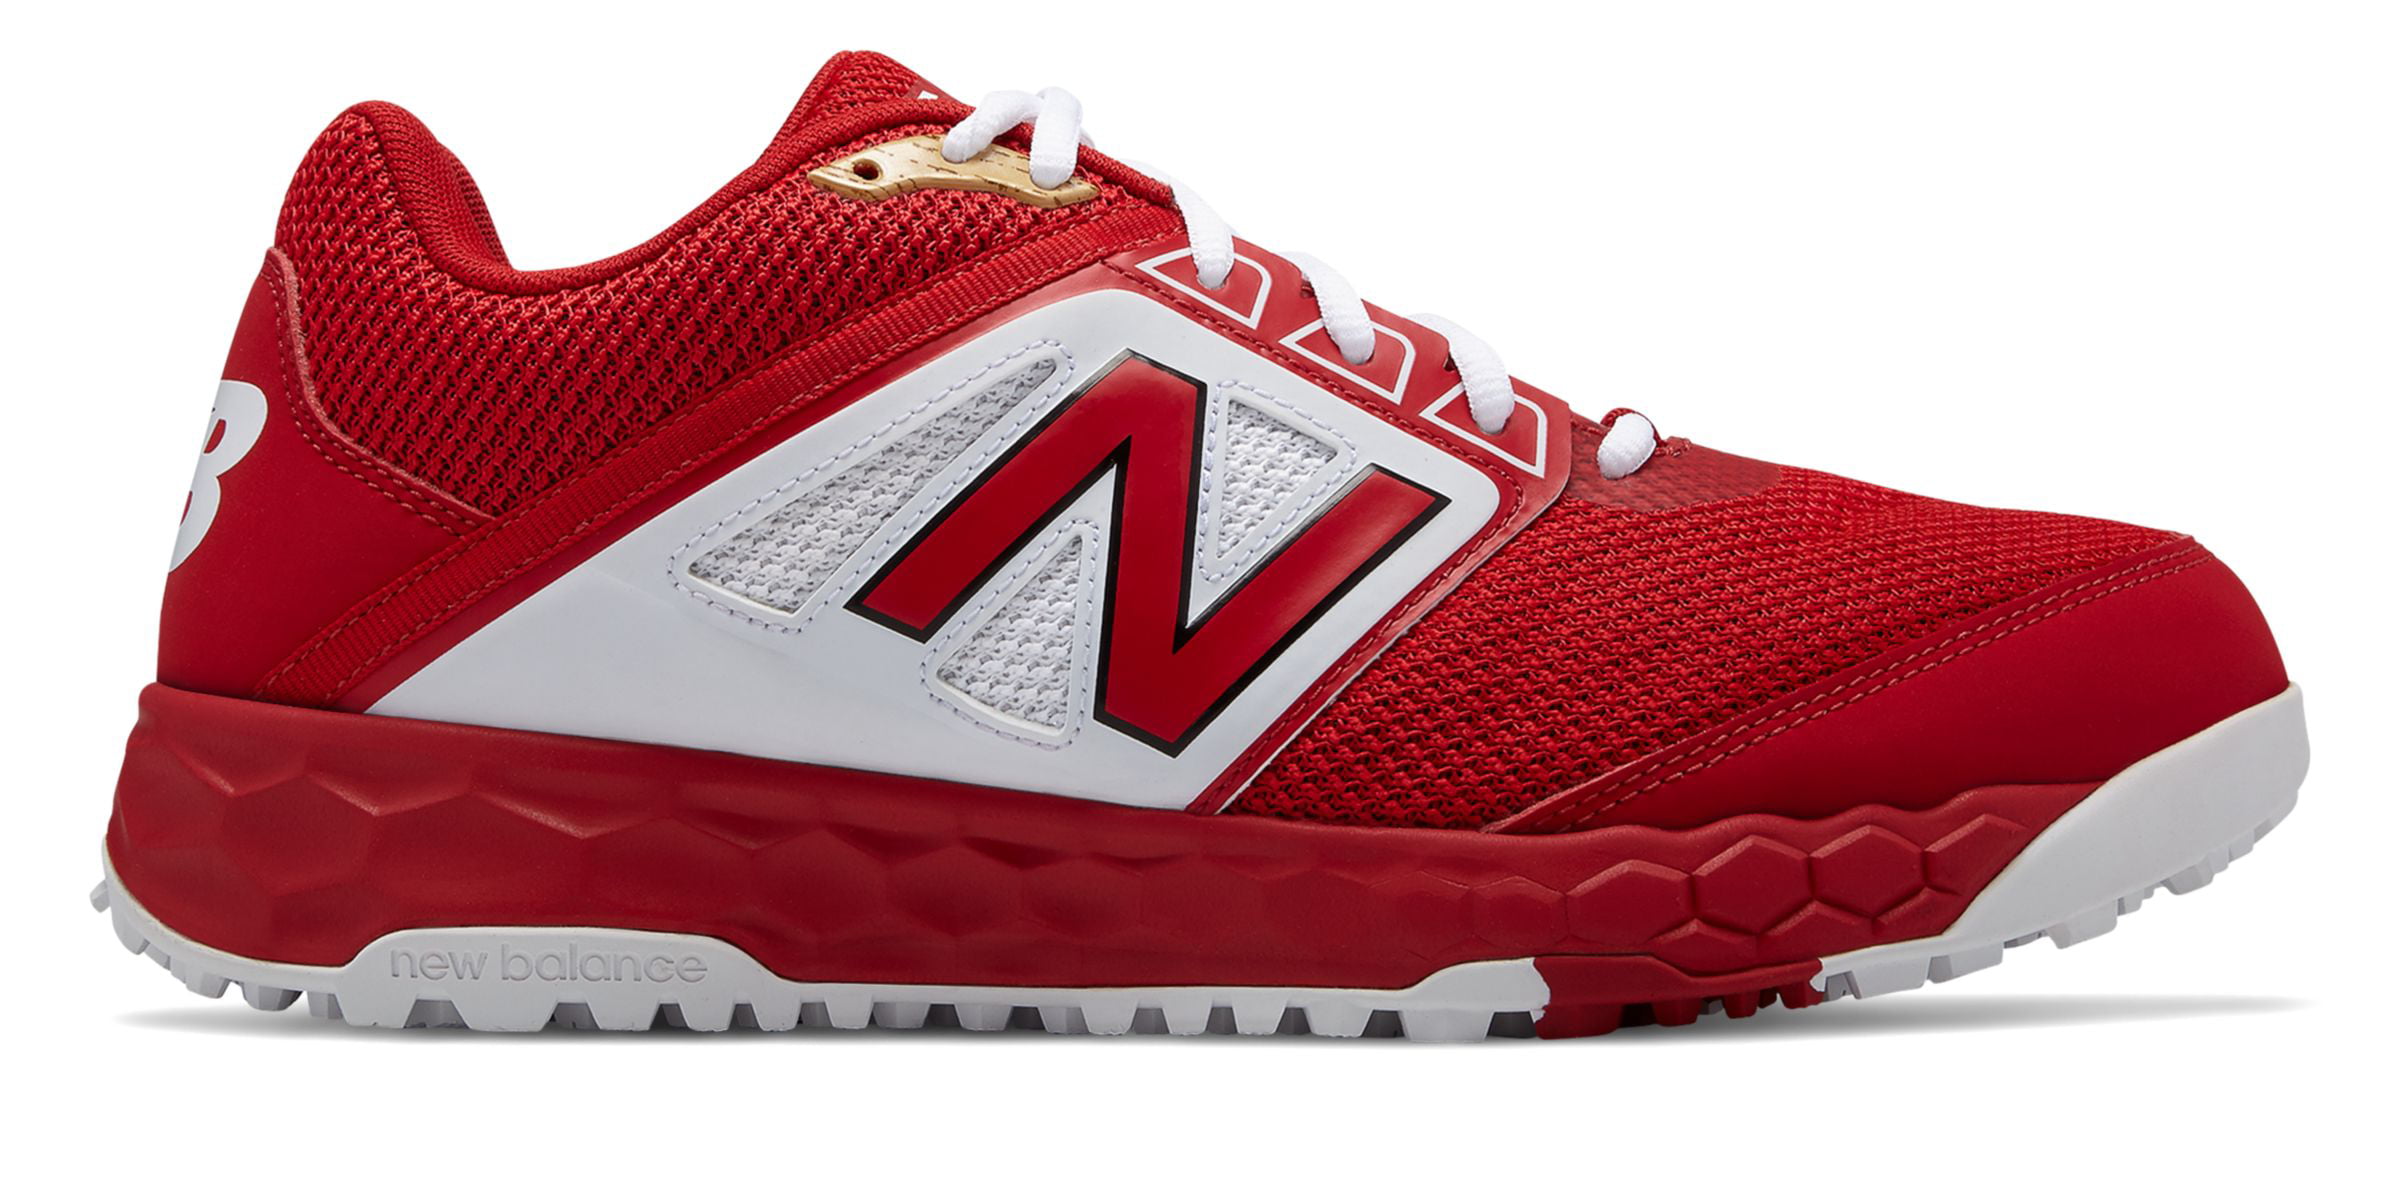 New Balance Low-Cut 3000v4 Turf Baseball Mens Shoes Red with White ...